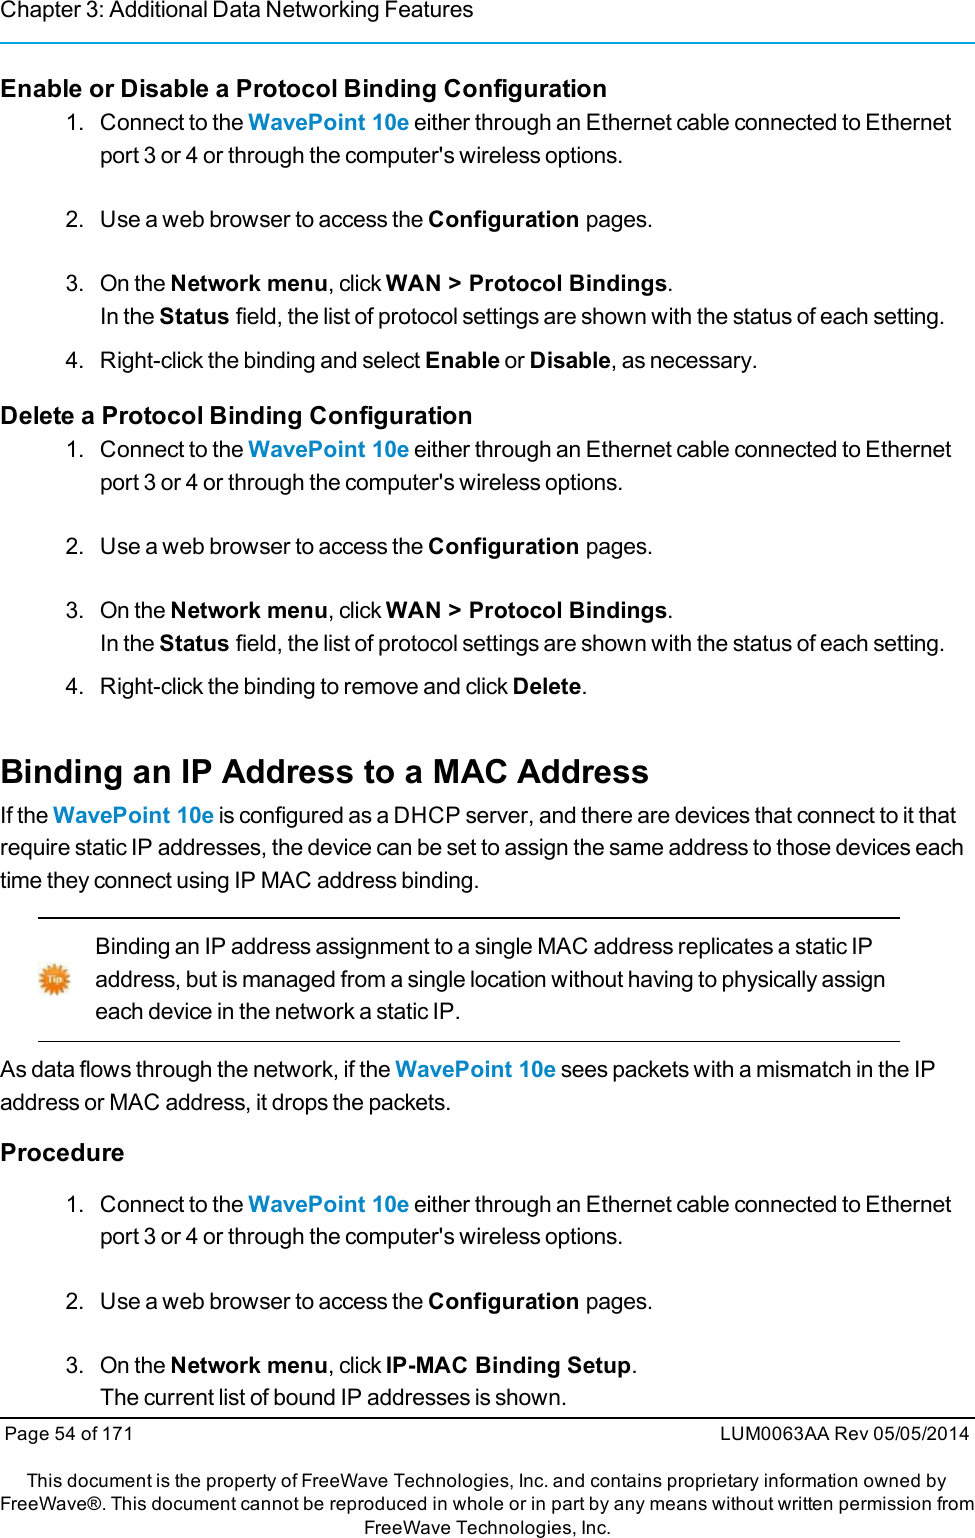 Chapter 3: Additional Data Networking FeaturesEnable or Disable a Protocol Binding Configuration1. Connect to the WavePoint 10e either through an Ethernet cable connected to Ethernetport 3 or 4 or through the computer&apos;s wireless options.2. Use a web browser to access the Configuration pages.3. On the Network menu, click WAN &gt; Protocol Bindings.In the Status field, the list of protocol settings are shown with the status of each setting.4. Right-click the binding and select Enable or Disable, as necessary.Delete a Protocol Binding Configuration1. Connect to the WavePoint 10e either through an Ethernet cable connected to Ethernetport 3 or 4 or through the computer&apos;s wireless options.2. Use a web browser to access the Configuration pages.3. On the Network menu, click WAN &gt; Protocol Bindings.In the Status field, the list of protocol settings are shown with the status of each setting.4. Right-click the binding to remove and click Delete.Binding an IP Address to a MAC AddressIf the WavePoint 10e is configured as a DHCP server, and there are devices that connect to it thatrequire static IP addresses, the device can be set to assign the same address to those devices eachtime they connect using IP MAC address binding.Binding an IP address assignment to a single MAC address replicates a static IPaddress, but is managed from a single location without having to physically assigneach device in the network a static IP.As data flows through the network, if the WavePoint 10e sees packets with a mismatch in the IPaddress or MAC address, it drops the packets.Procedure1. Connect to the WavePoint 10e either through an Ethernet cable connected to Ethernetport 3 or 4 or through the computer&apos;s wireless options.2. Use a web browser to access the Configuration pages.3. On the Network menu, click IP-MAC Binding Setup.The current list of bound IP addresses is shown.Page 54 of 171 LUM0063AA Rev 05/05/2014This document is the property of FreeWave Technologies, Inc. and contains proprietary information owned byFreeWave®. This document cannot be reproduced in whole or in part by any means without written permission fromFreeWave Technologies, Inc.